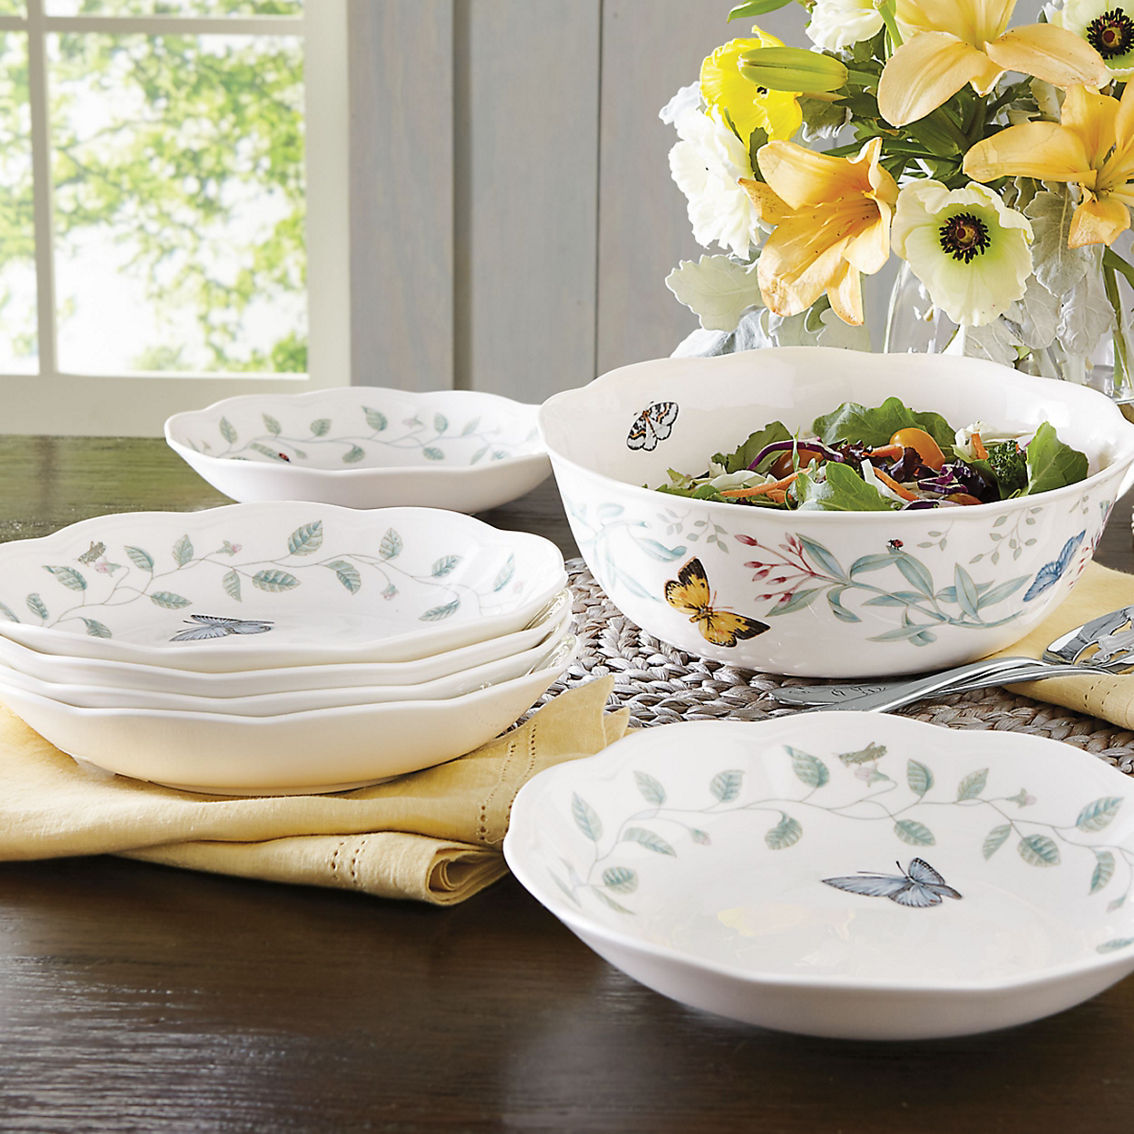 Lenox Butterfly Meadow 7 pc. Bowl Set - Image 2 of 2